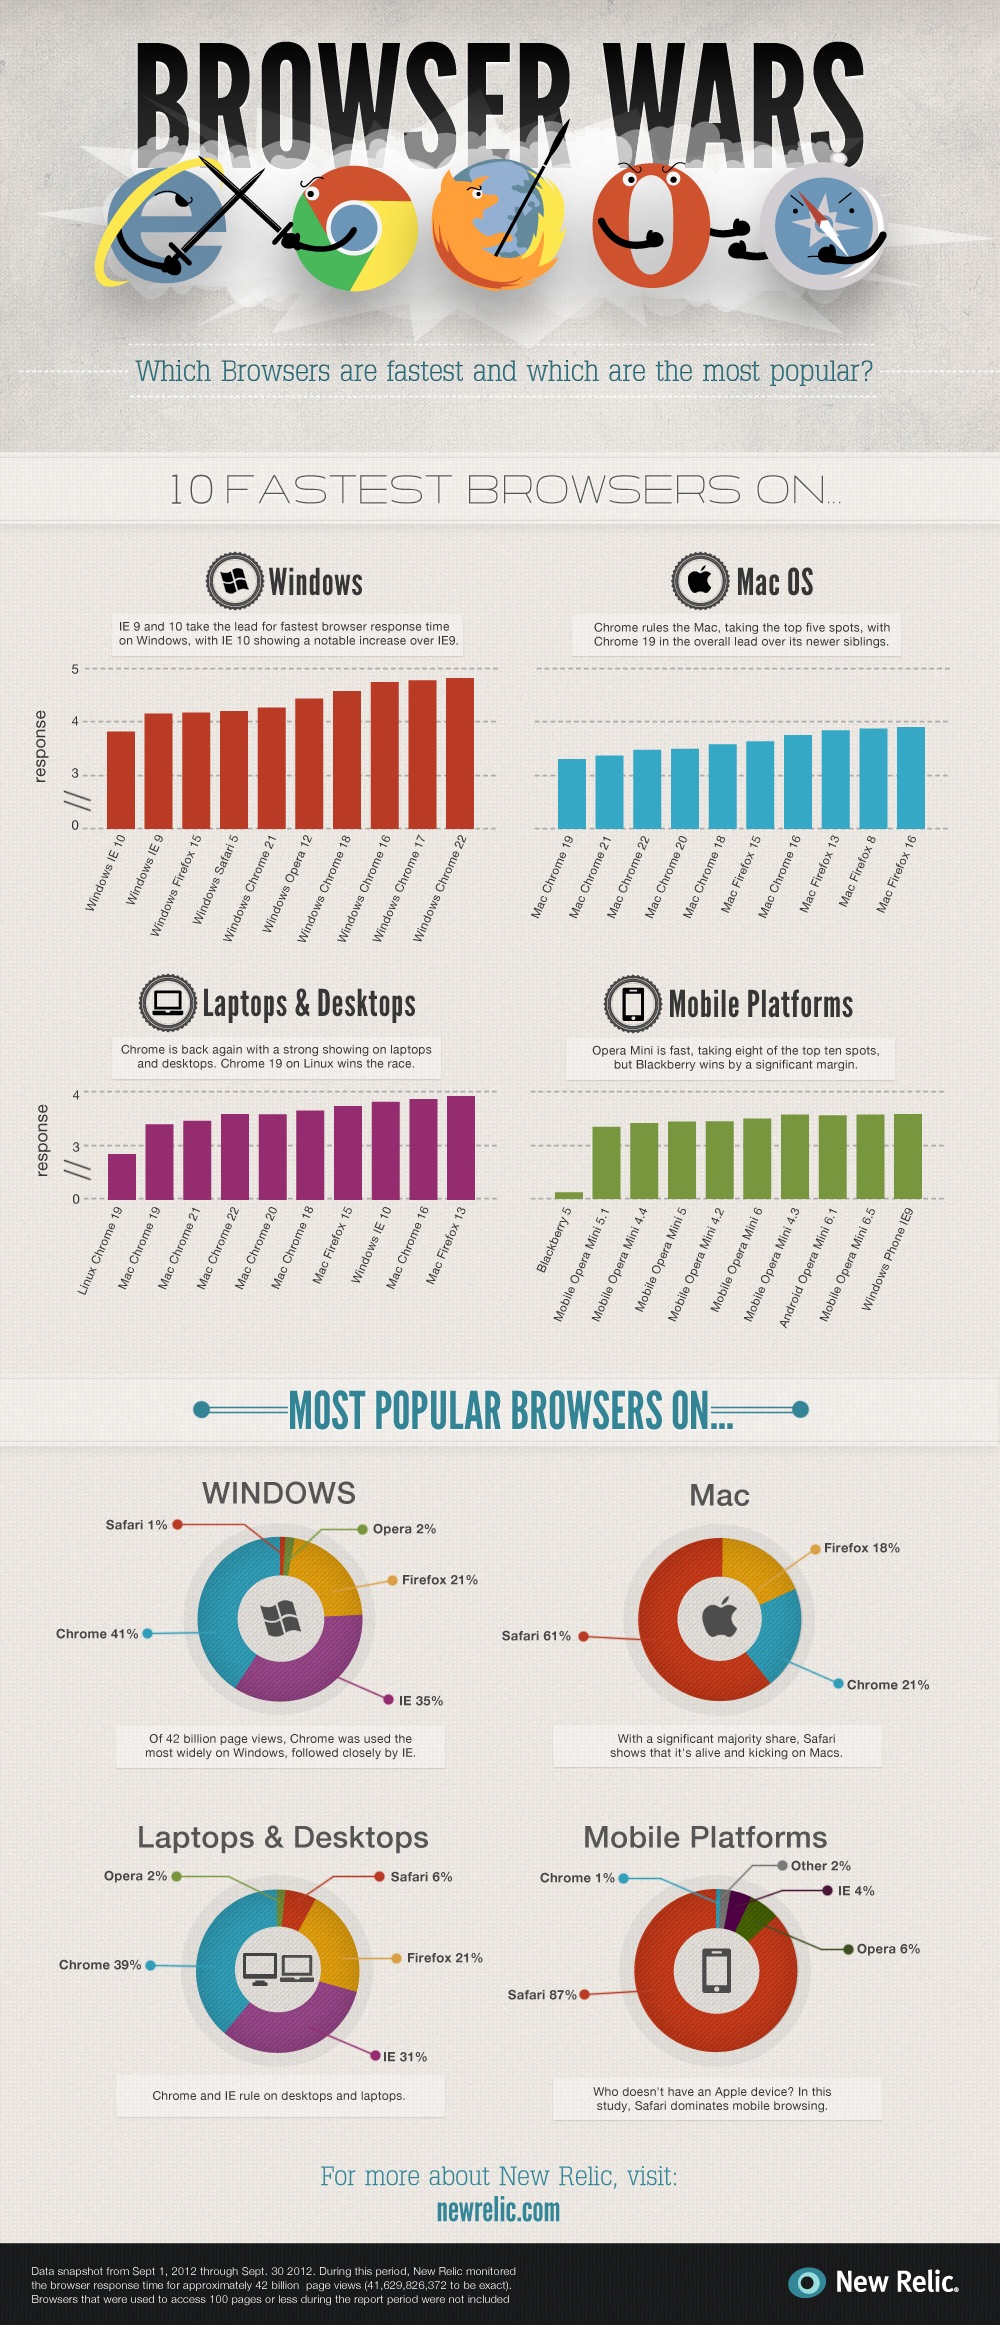 Browser Wars: Which Browsers Are the Fastest